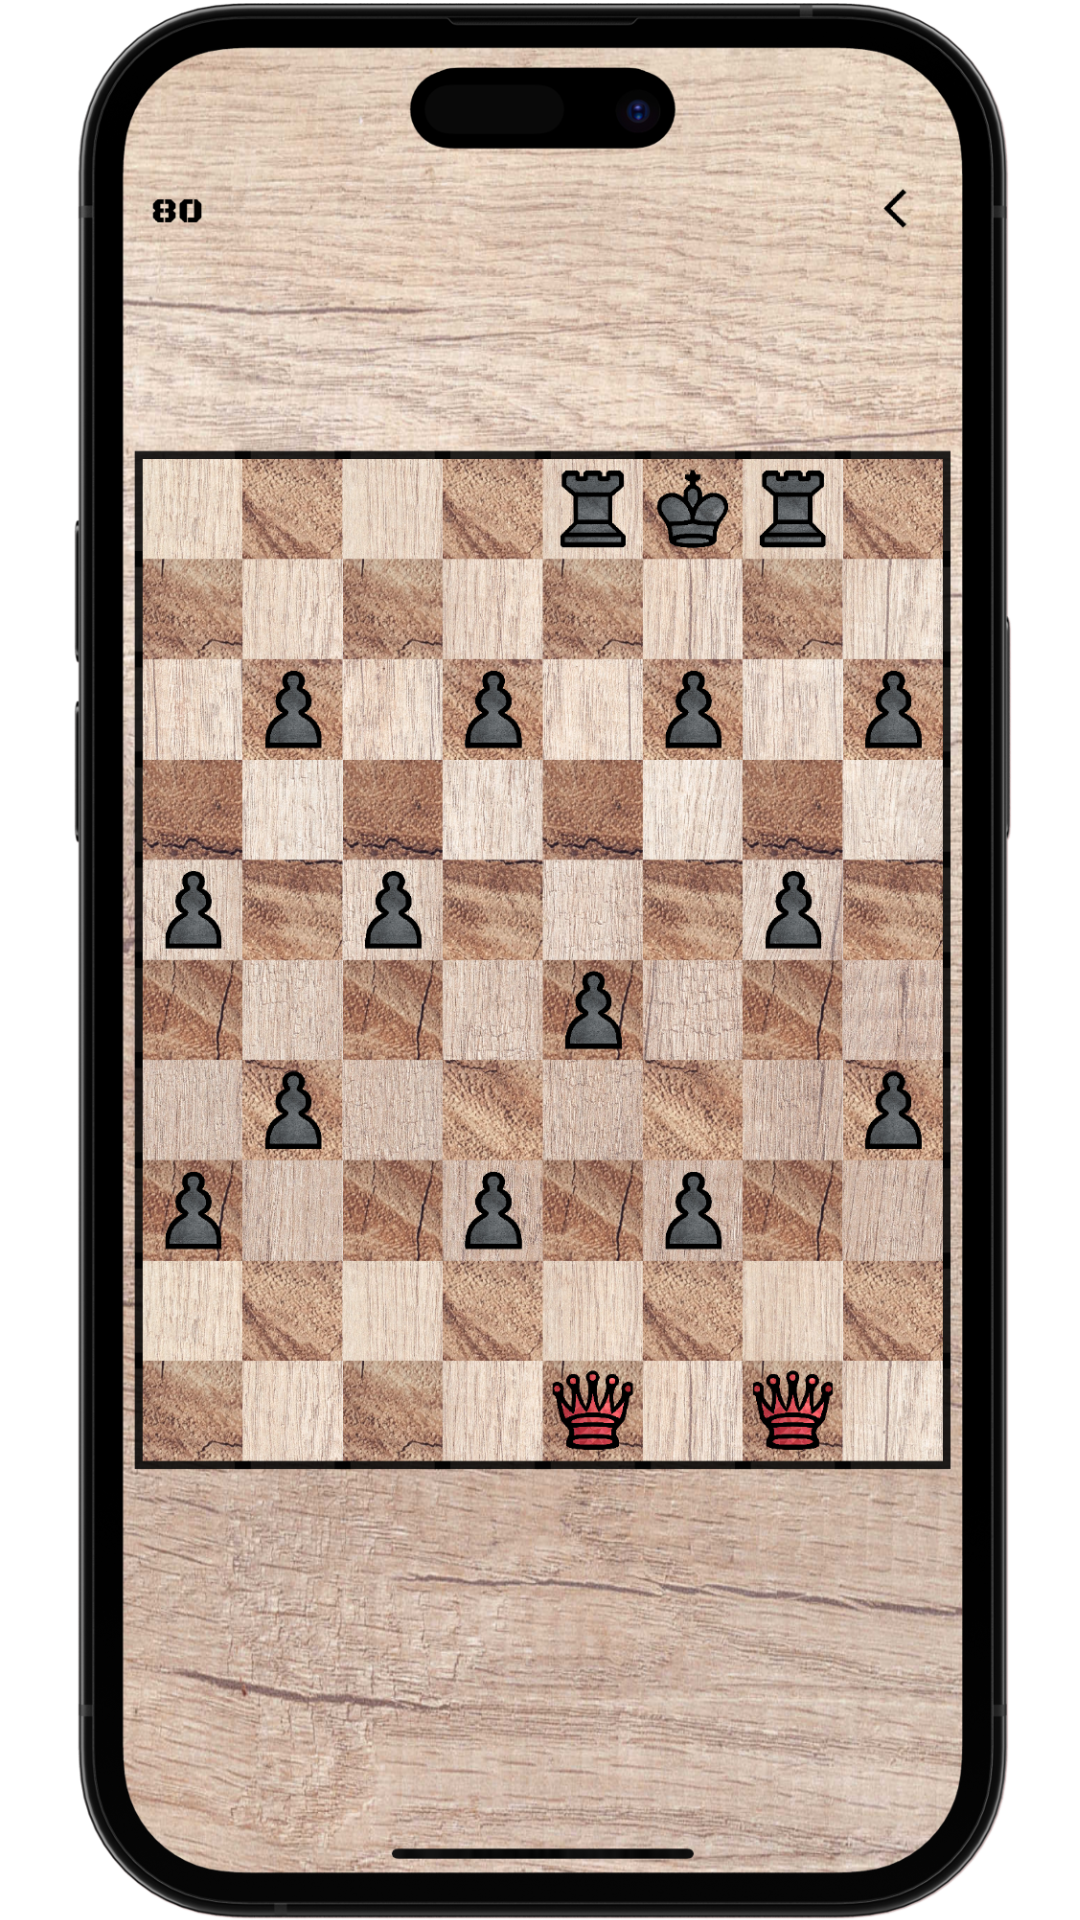 Use multiple queens to assassinate the opponent’s king.